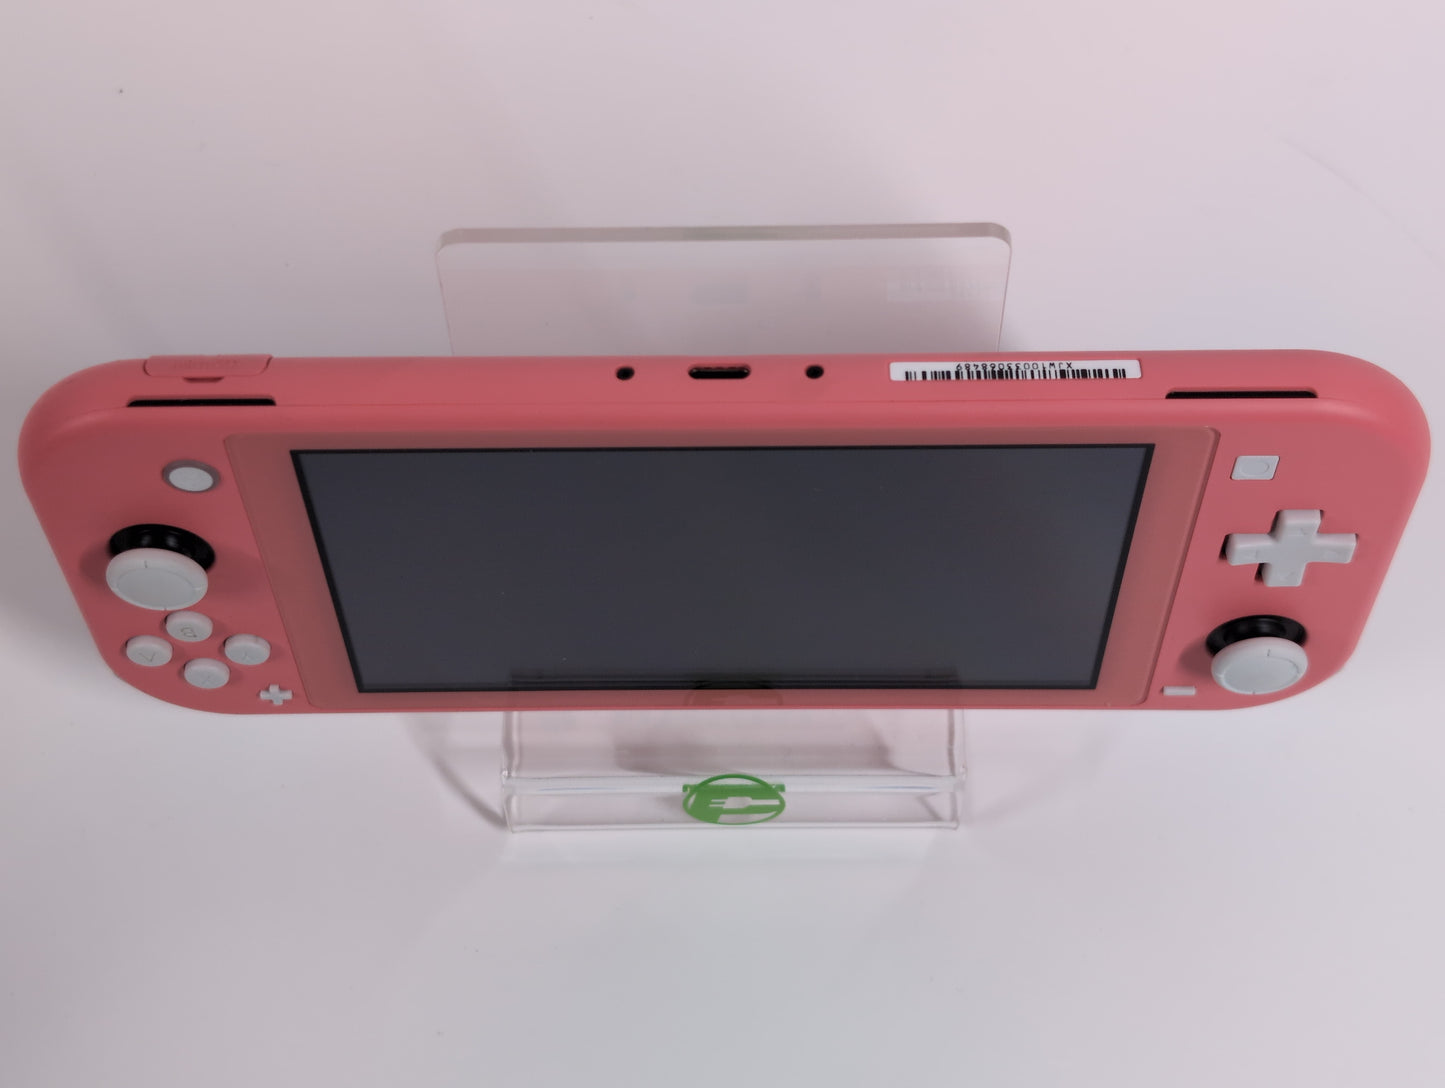 Nintendo Switch Lite Video Game Console HDH-001 Coral